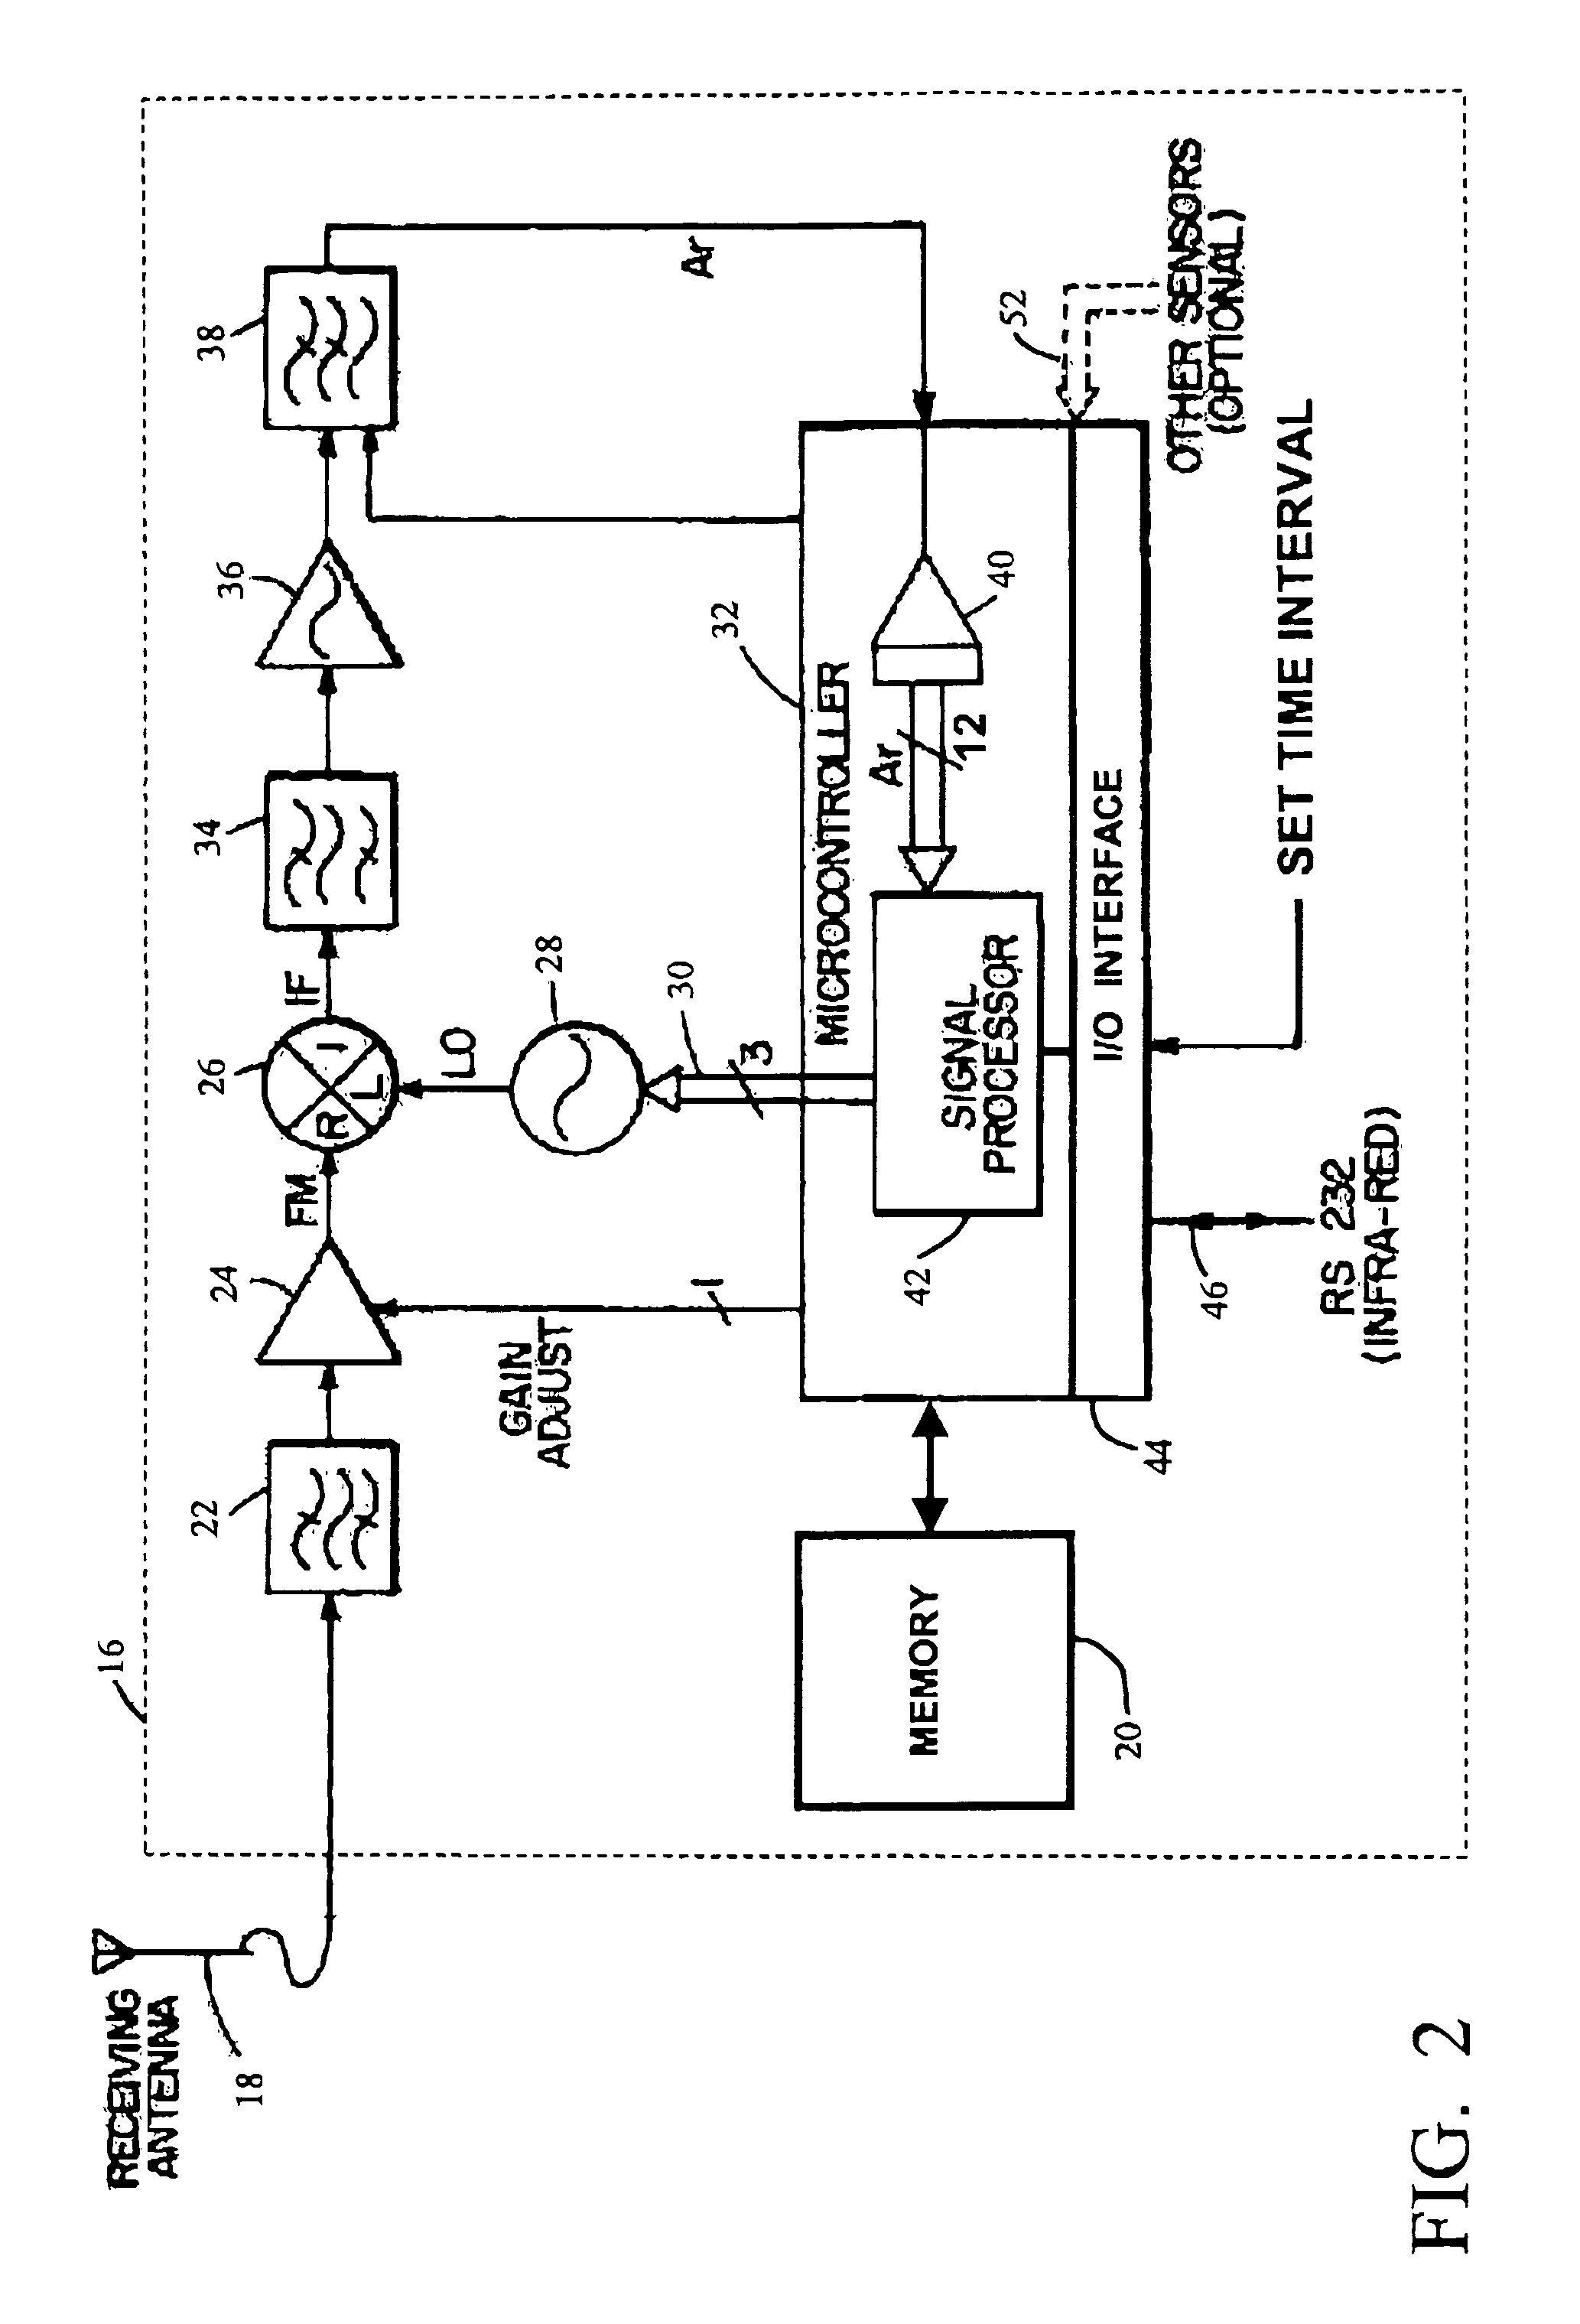 Apparatus and method for tracing a path travelled by an entity or object, and tag for use therewith